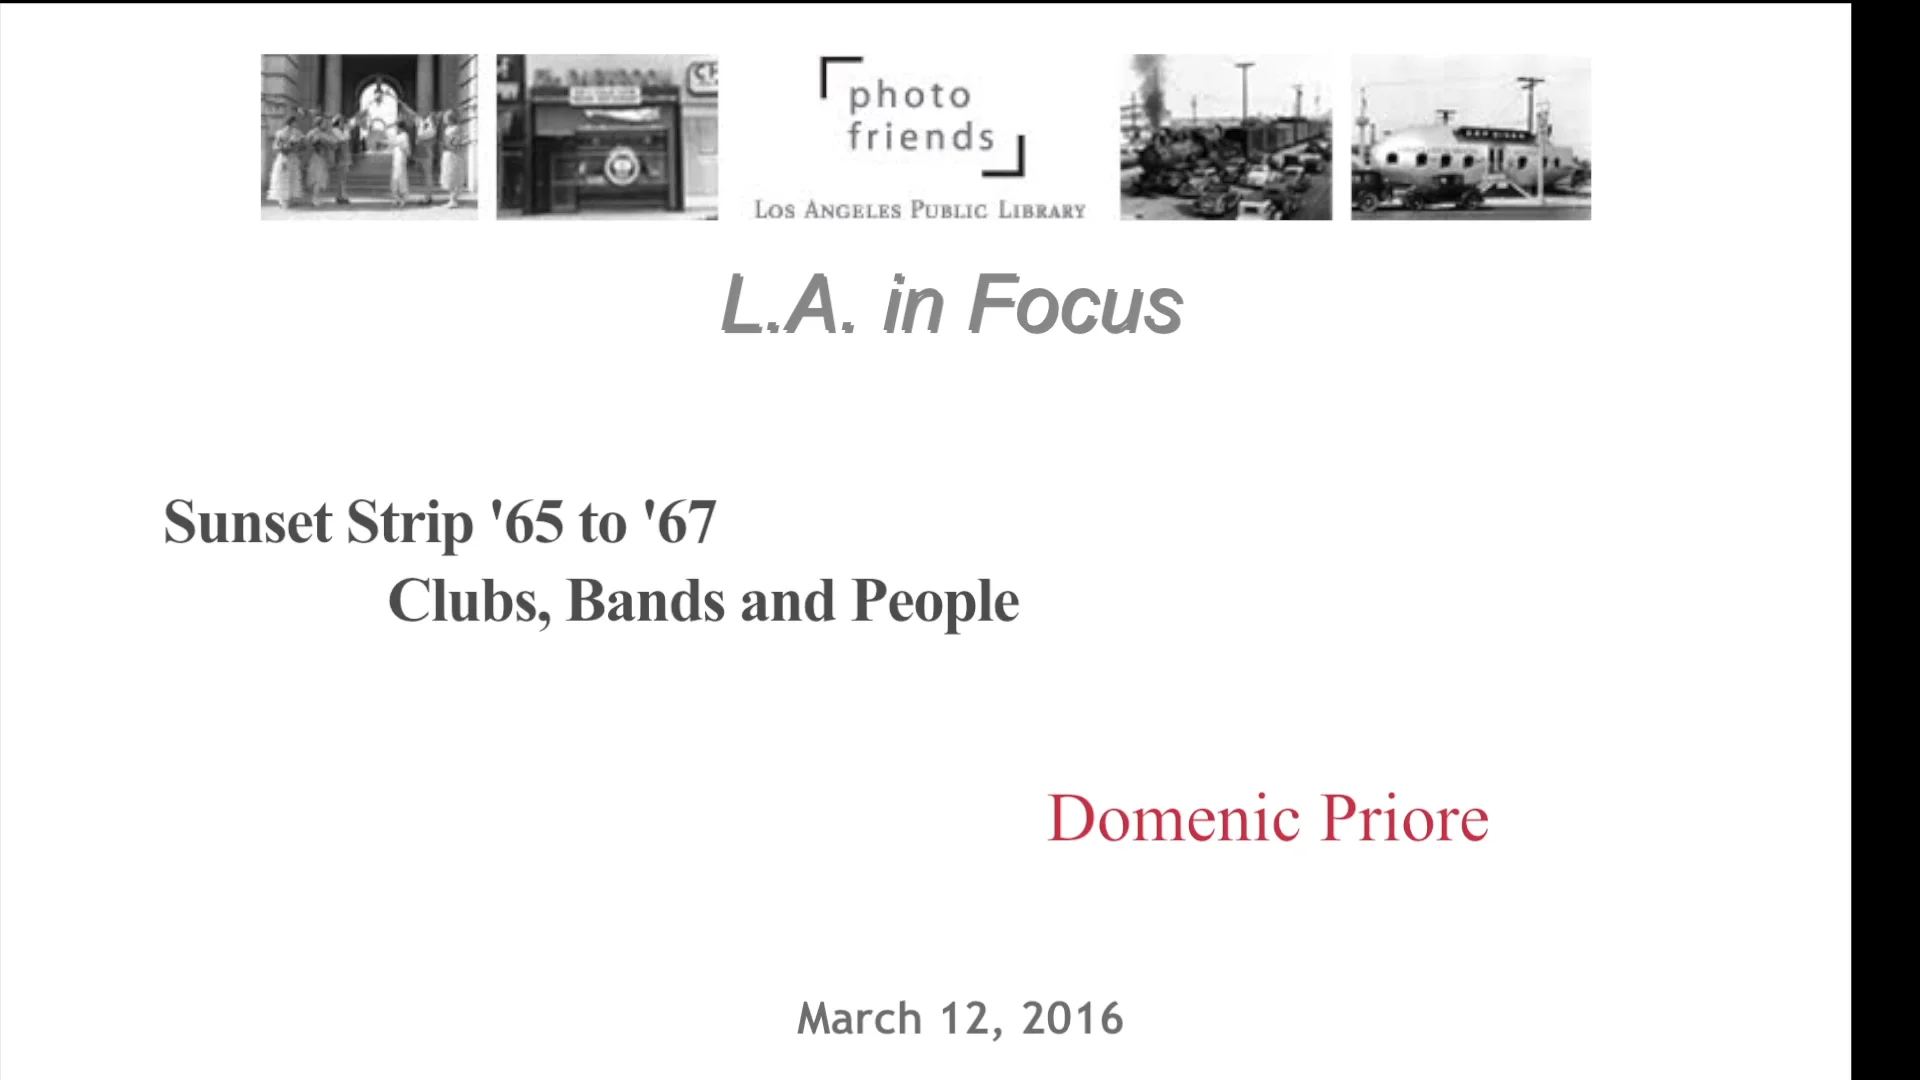 L.A. In Focus: Edward Colver on Vimeo